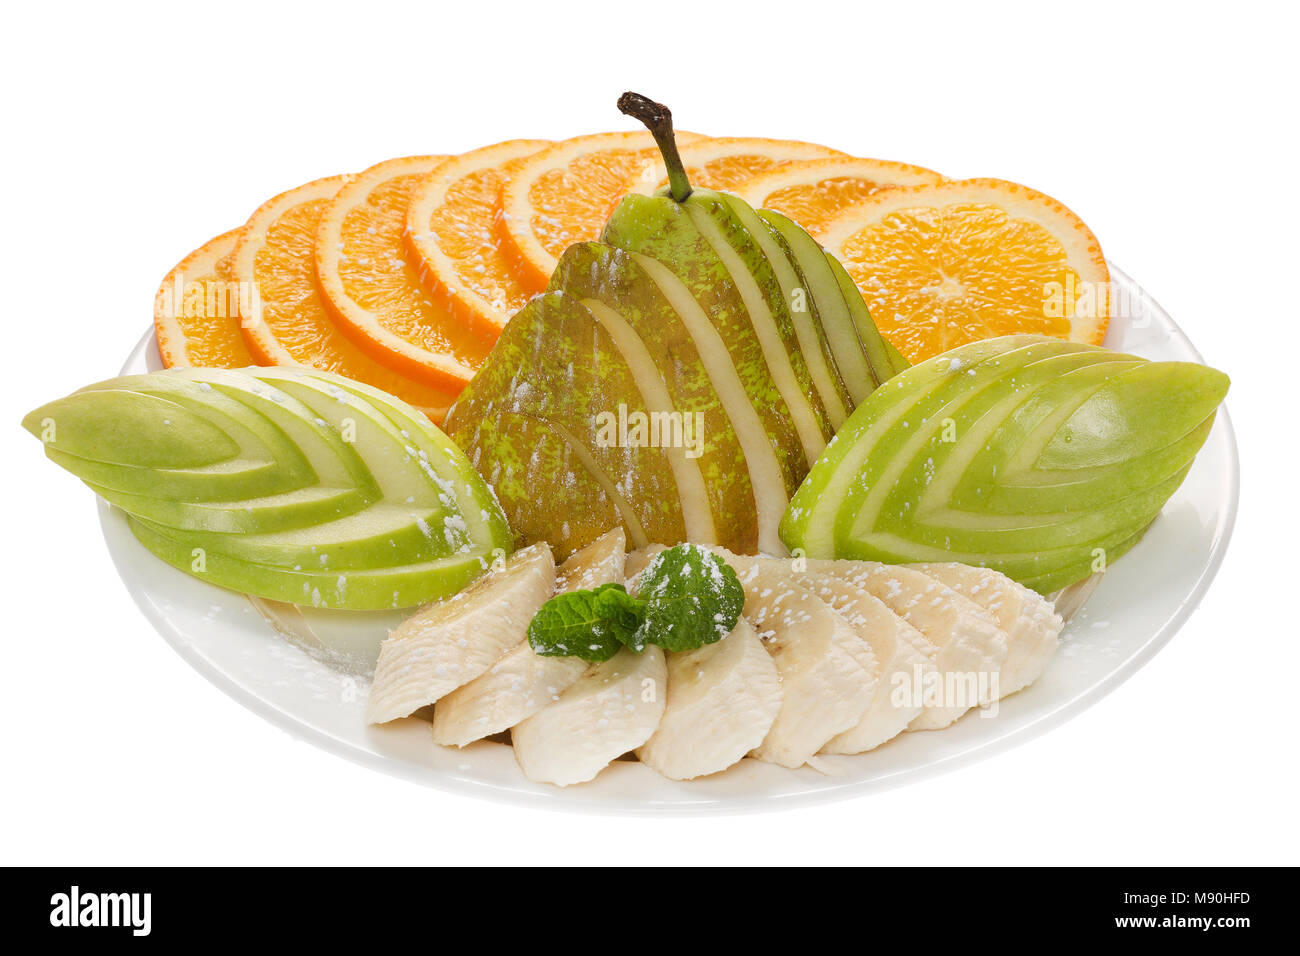 Fruit plate oranges apples pears bananas isolated Stock Photo